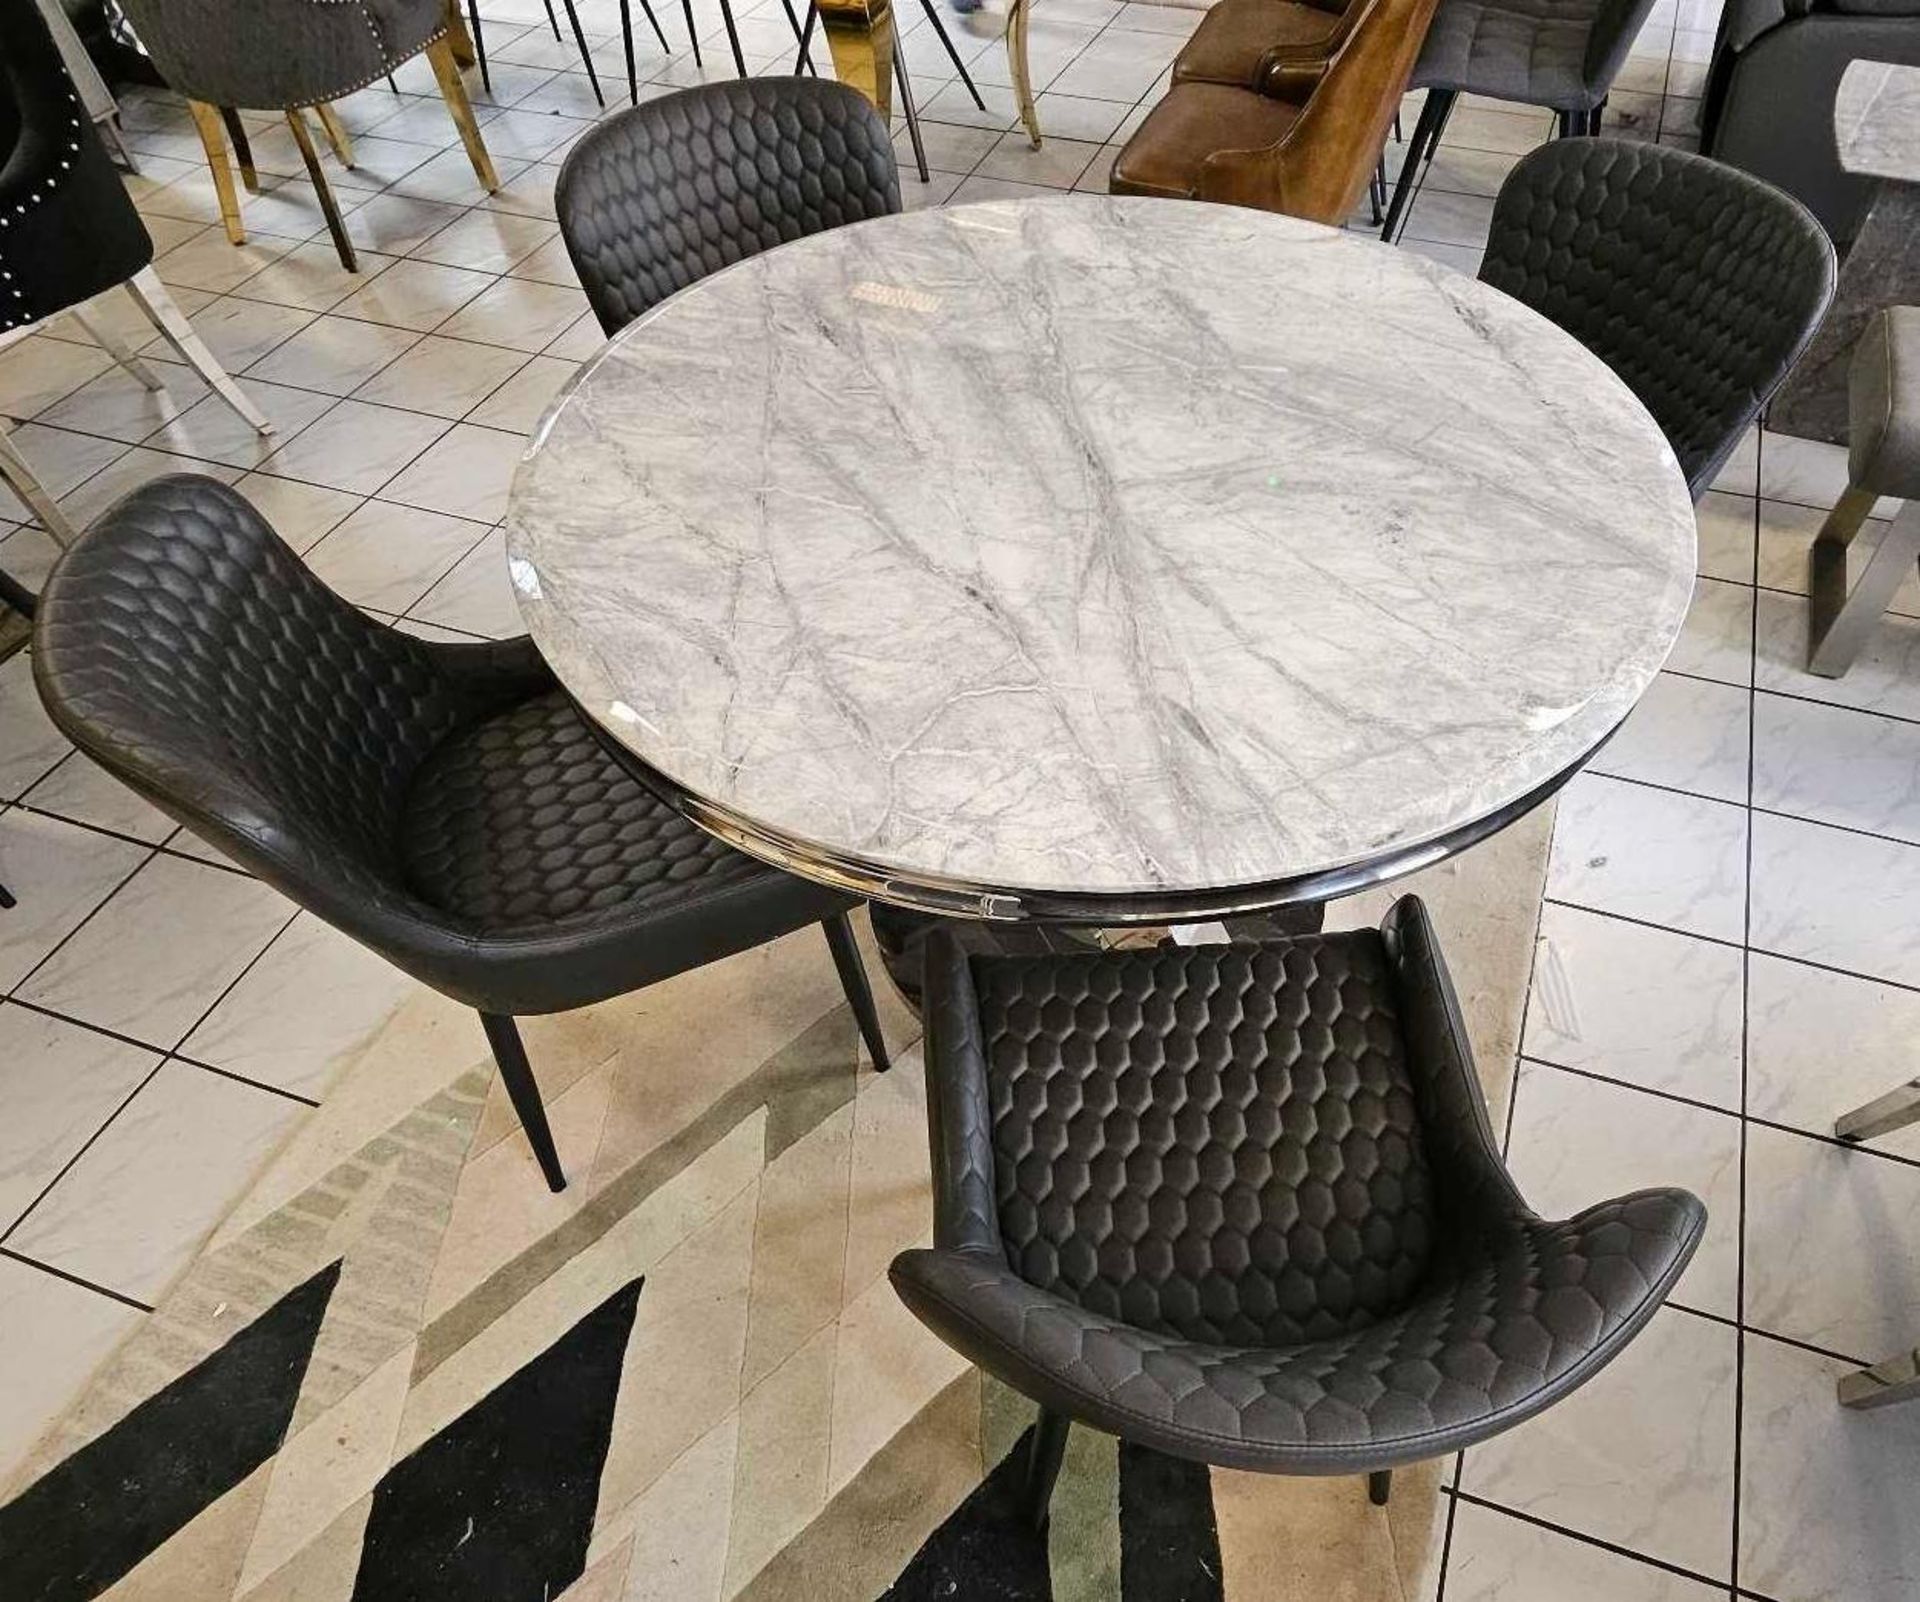 * EX DISPLAY* Furniture Village Dolce Round Dining Table With Marble Top + 4 Chairs.